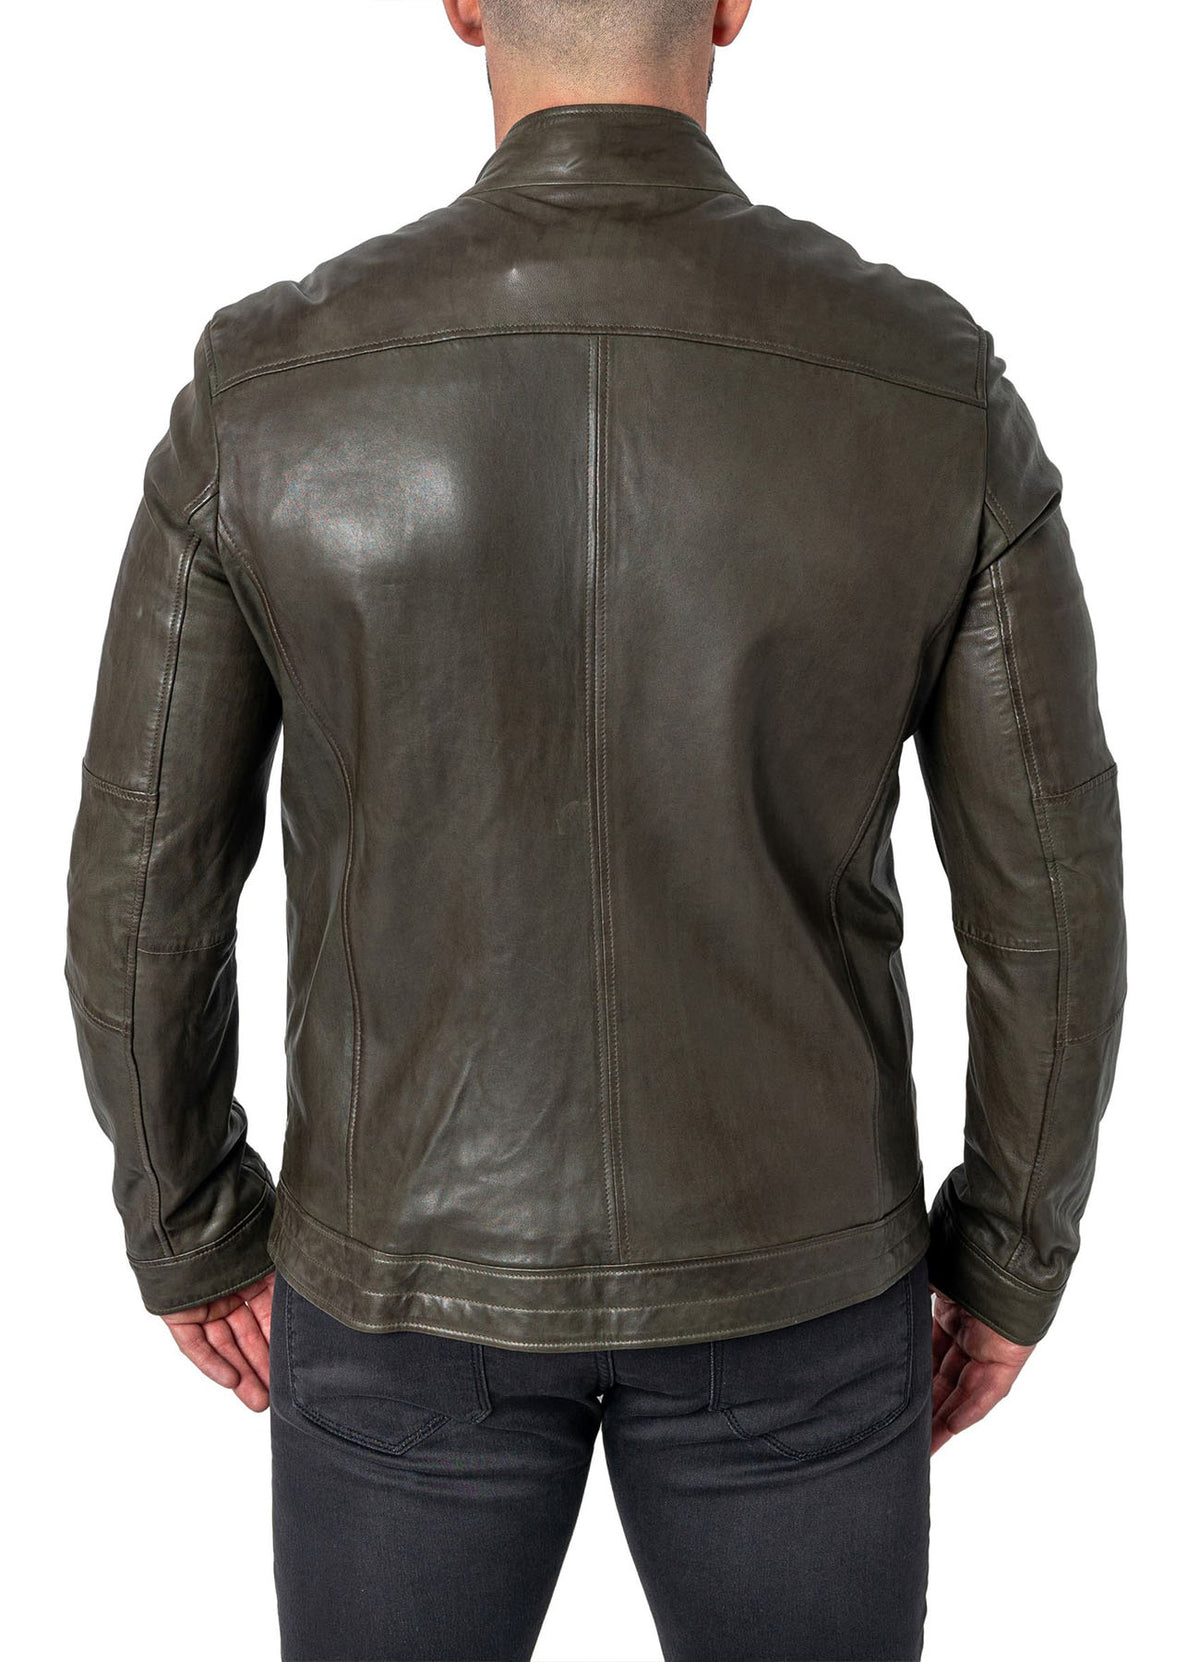 Mens Military Style Olive Green Leather Jacket | Shop Now!